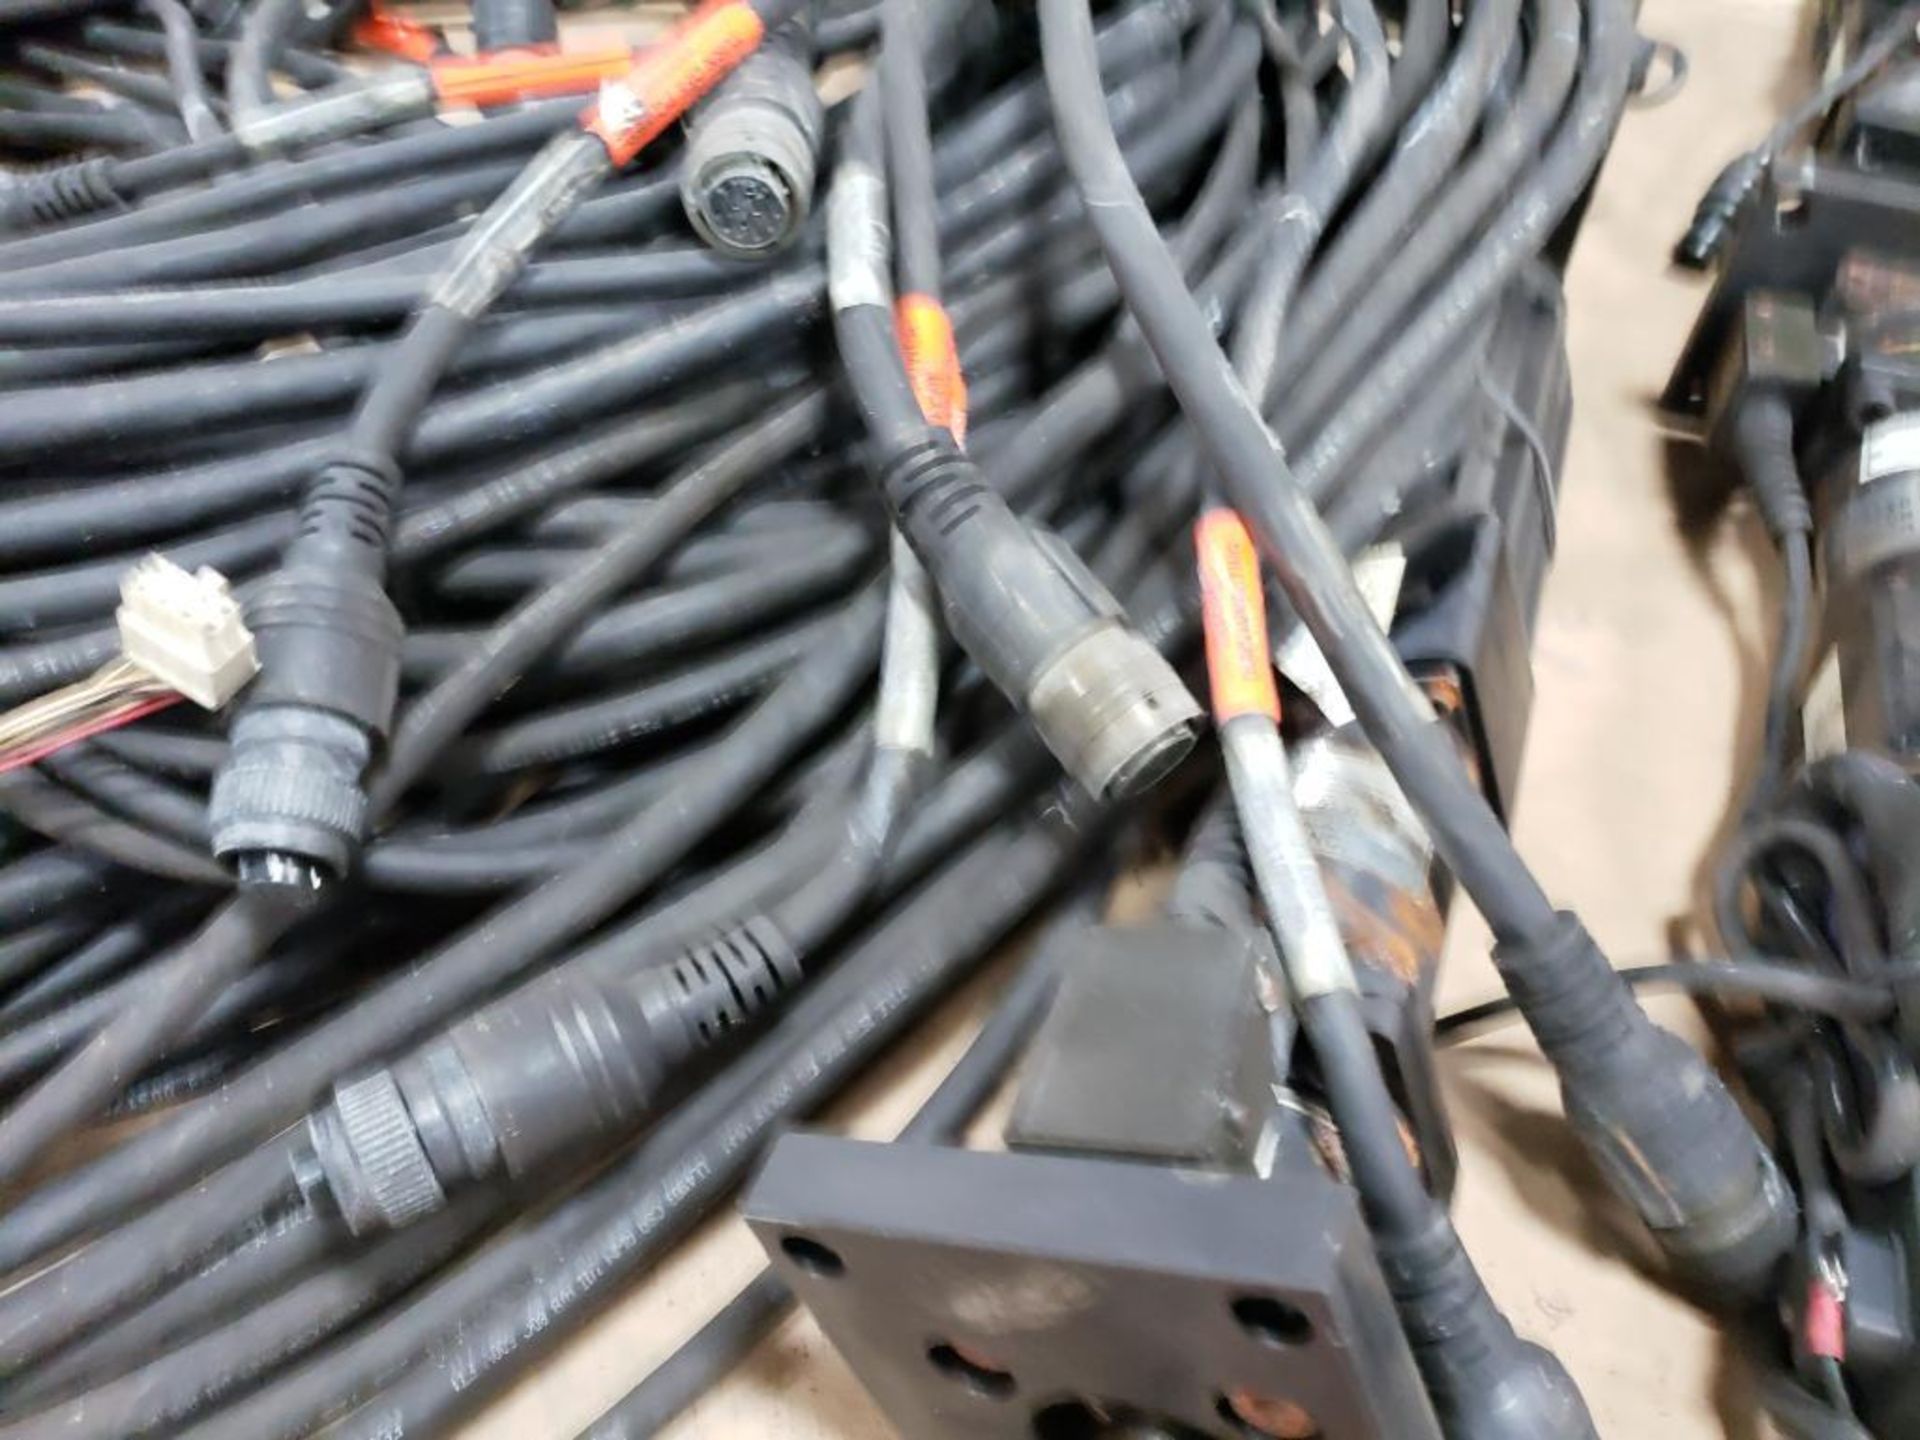 Qty 4 - FEC motorized nut runners NFT-202RM3-S and connection cords. 0.64Nm-Torque. - Image 3 of 16